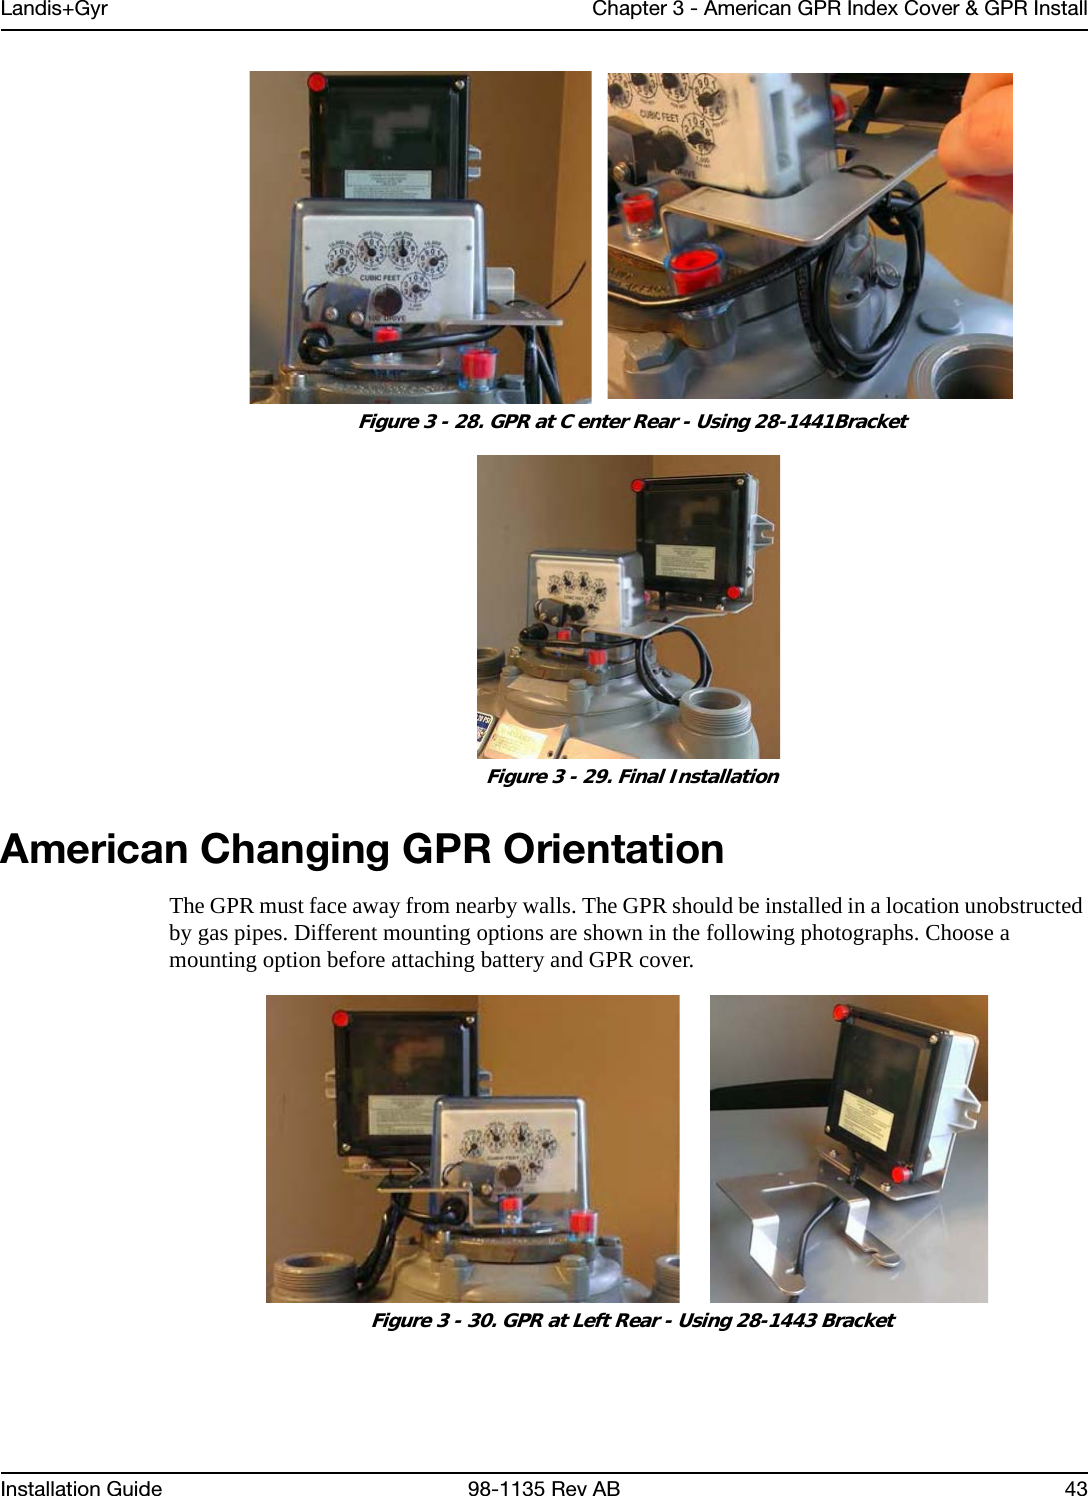 Landis+Gyr Chapter 3 - American GPR Index Cover &amp; GPR InstallInstallation Guide 98-1135 Rev AB 43 Figure 3 - 28. GPR at C enter Rear - Using 28-1441Bracket Figure 3 - 29. Final InstallationAmerican Changing GPR OrientationThe GPR must face away from nearby walls. The GPR should be installed in a location unobstructed by gas pipes. Different mounting options are shown in the following photographs. Choose a mounting option before attaching battery and GPR cover. Figure 3 - 30. GPR at Left Rear - Using 28-1443 Bracket